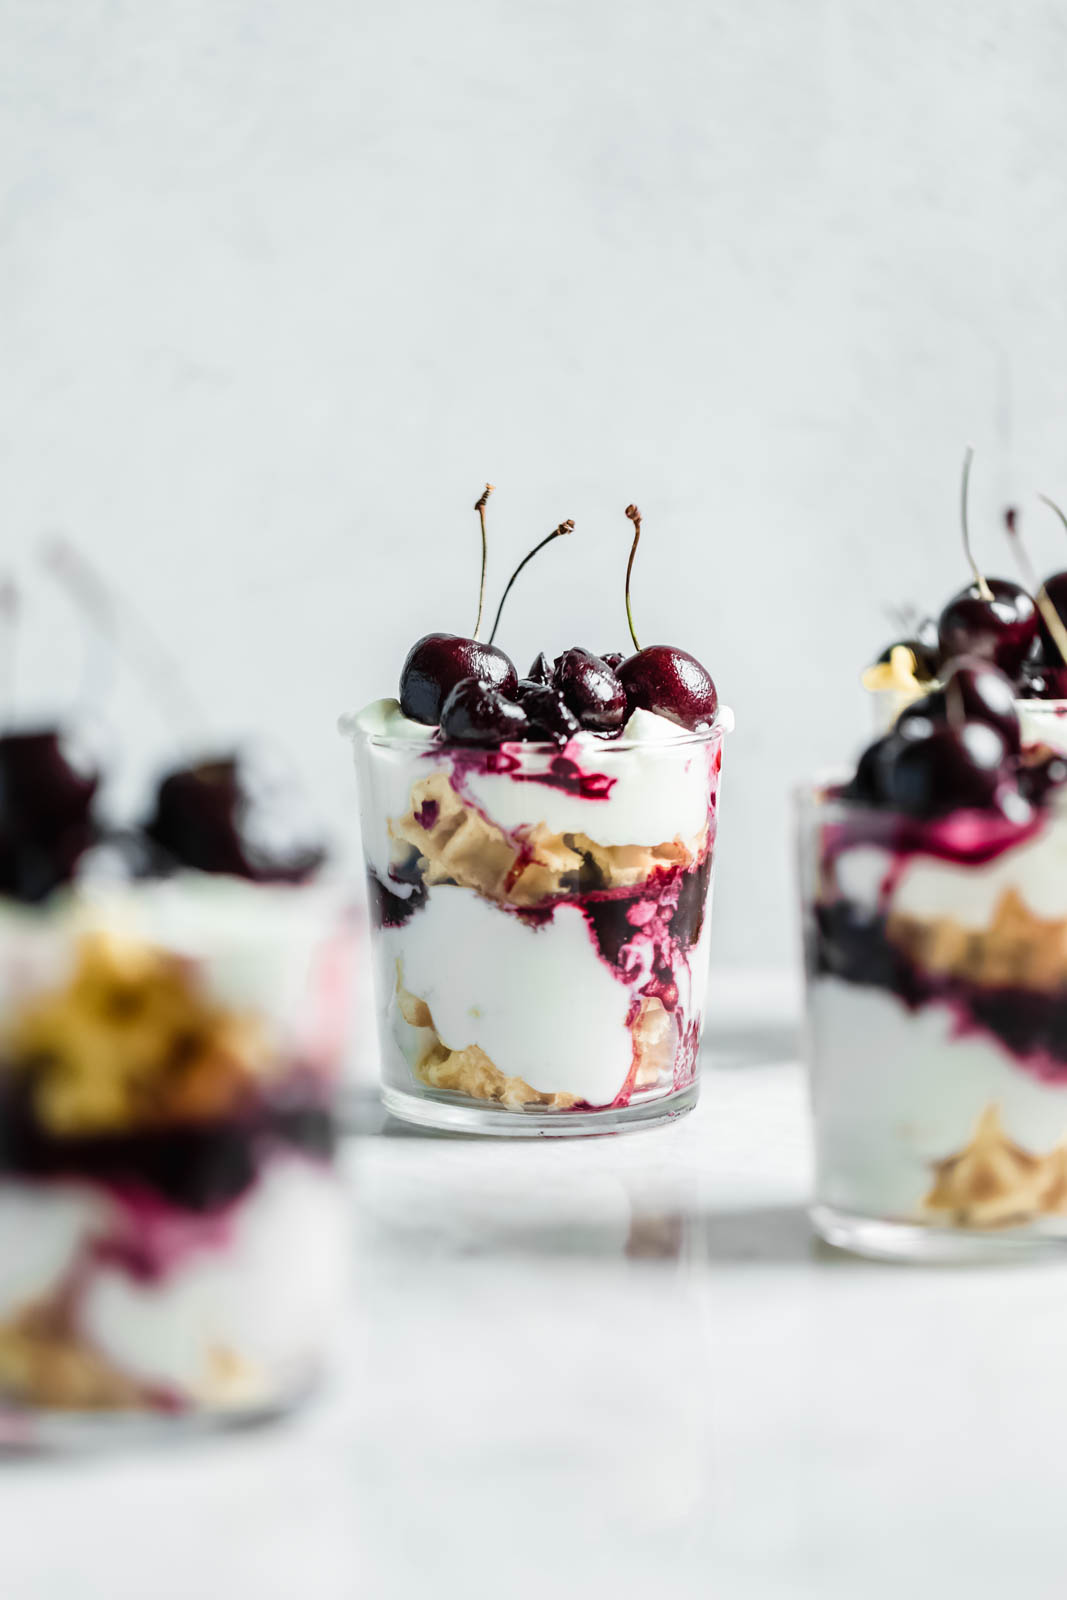 Layers of quick sautéed black cherries, fresh whipped cream, and Belgian waffles make this no-bake waffle parfait a total no-brainer summer dessert.